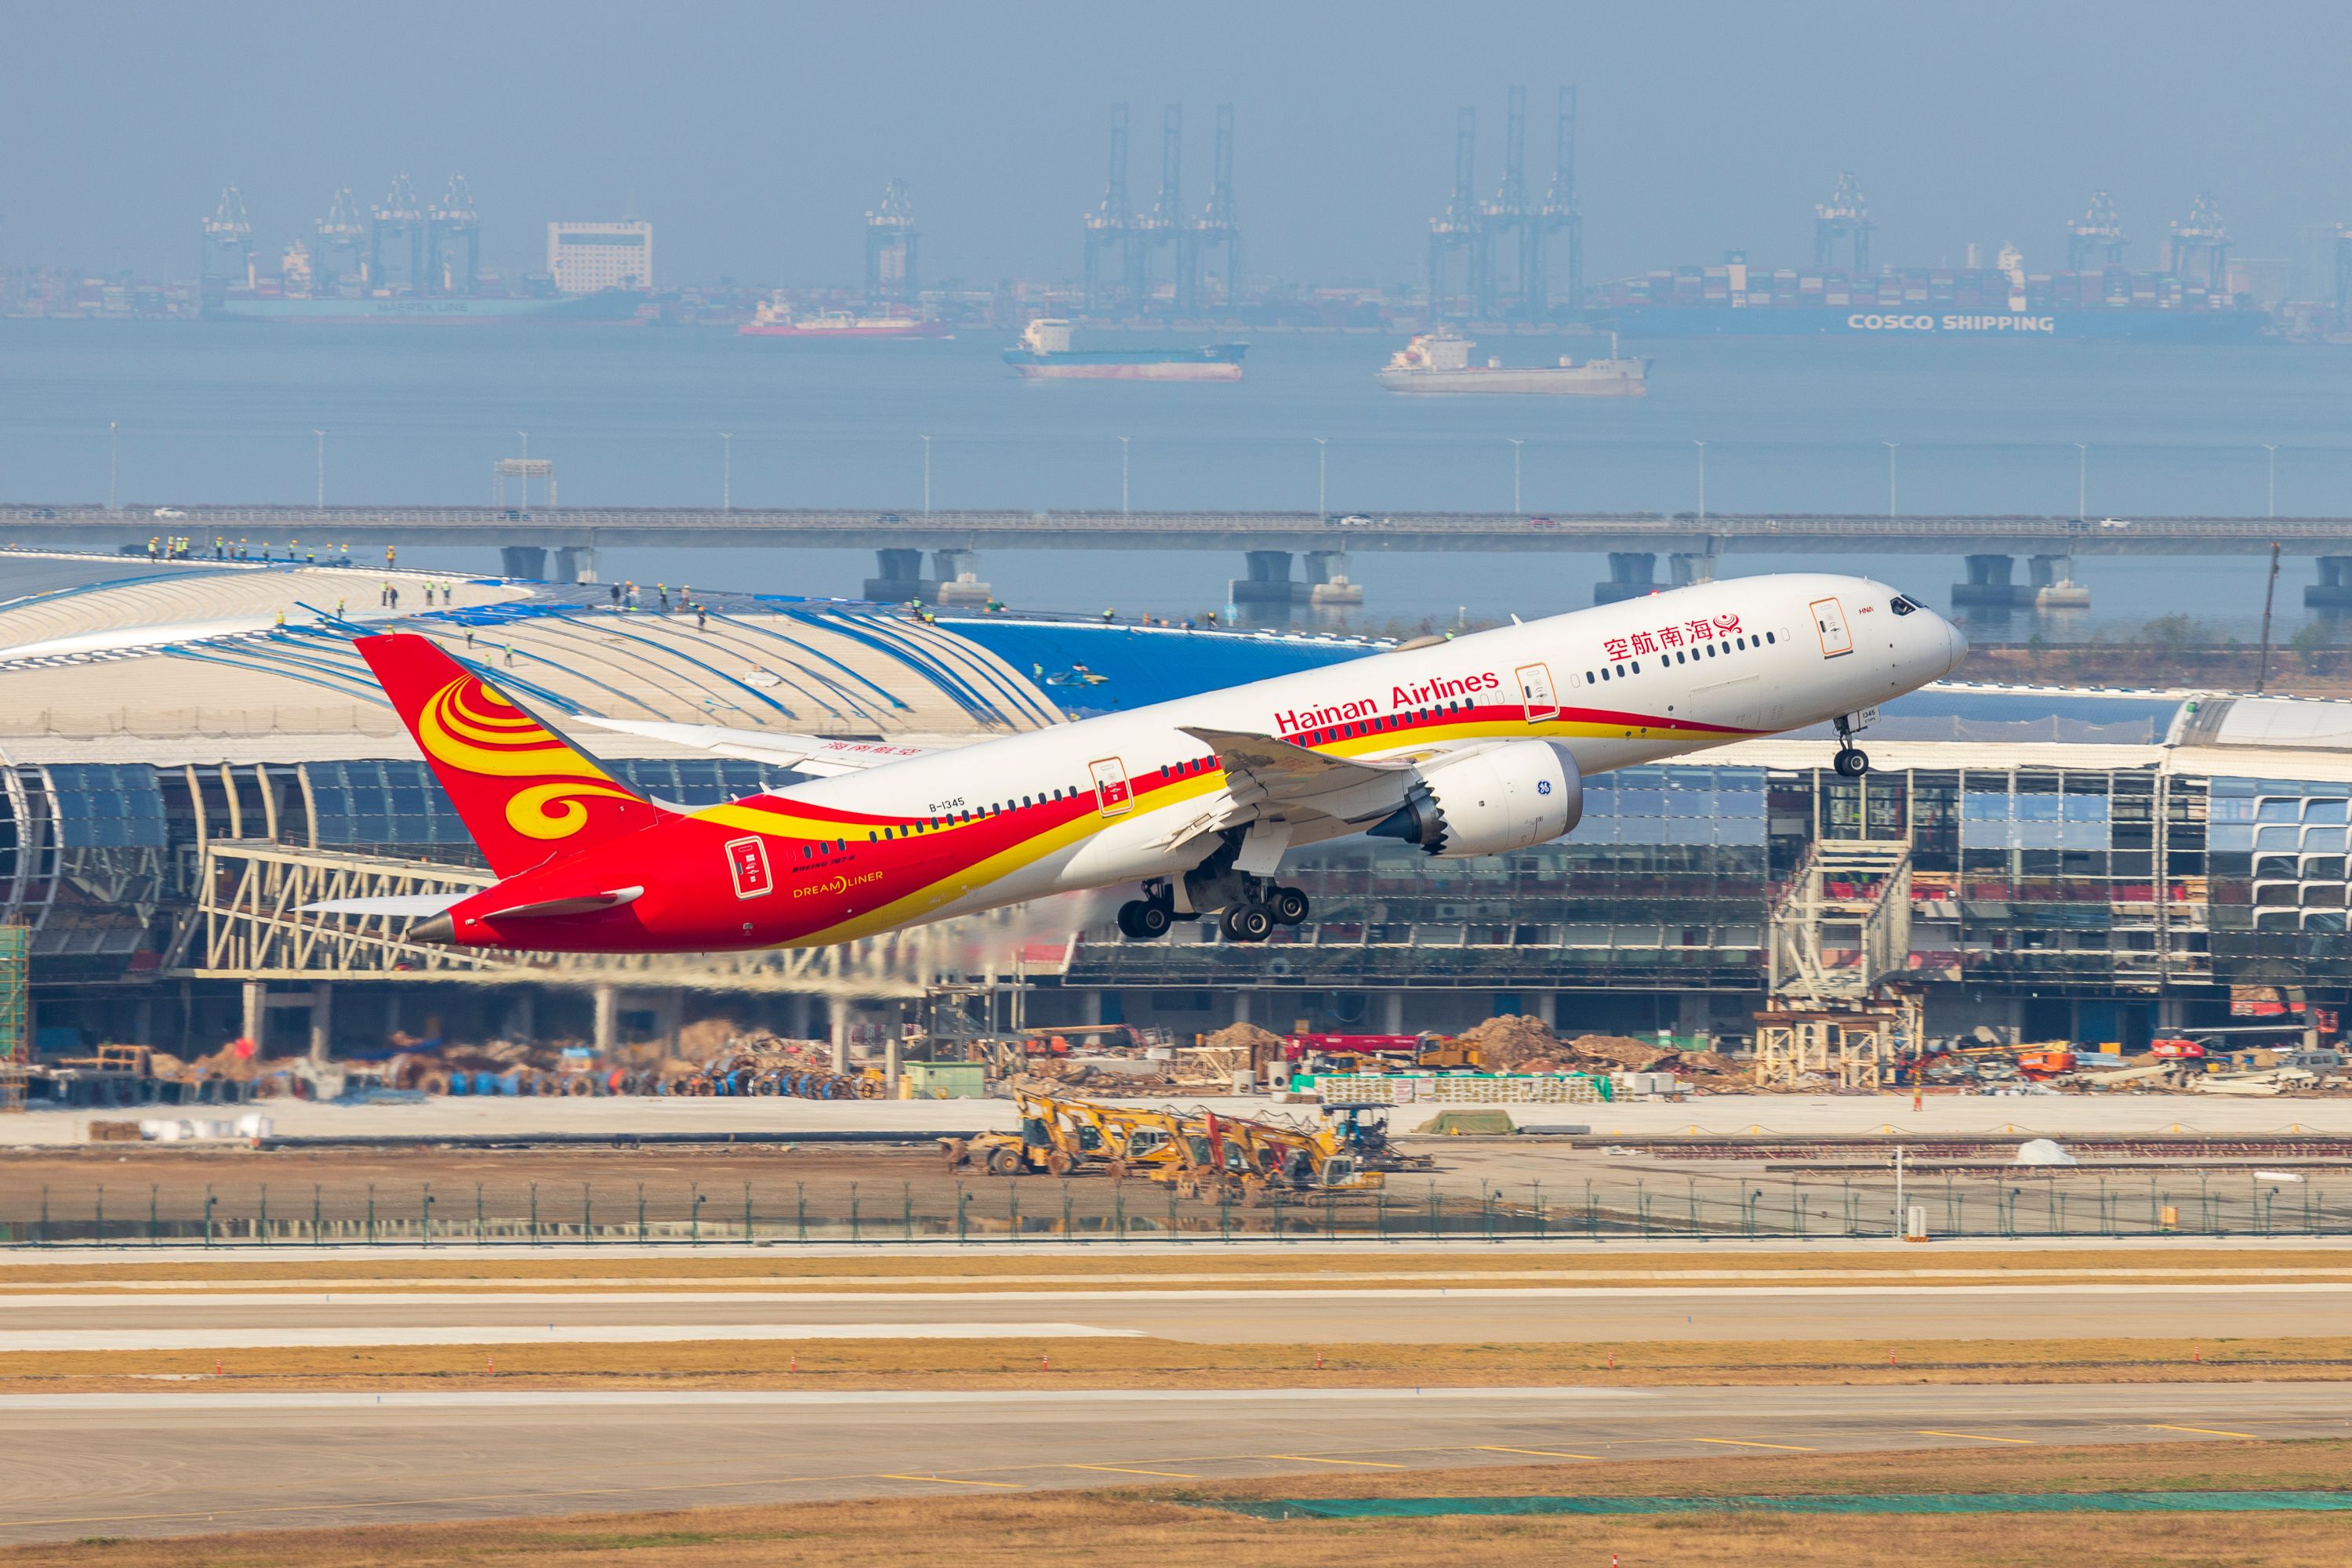 A Boeing 787-8 aircraft of Hainan Airlines takes off at Shenzhen Bao'an International Airport on the second day of the Chinese New Year, the Year of the Ox, on February 13, 2021 in Shenzhen, Guangdong Province of China.